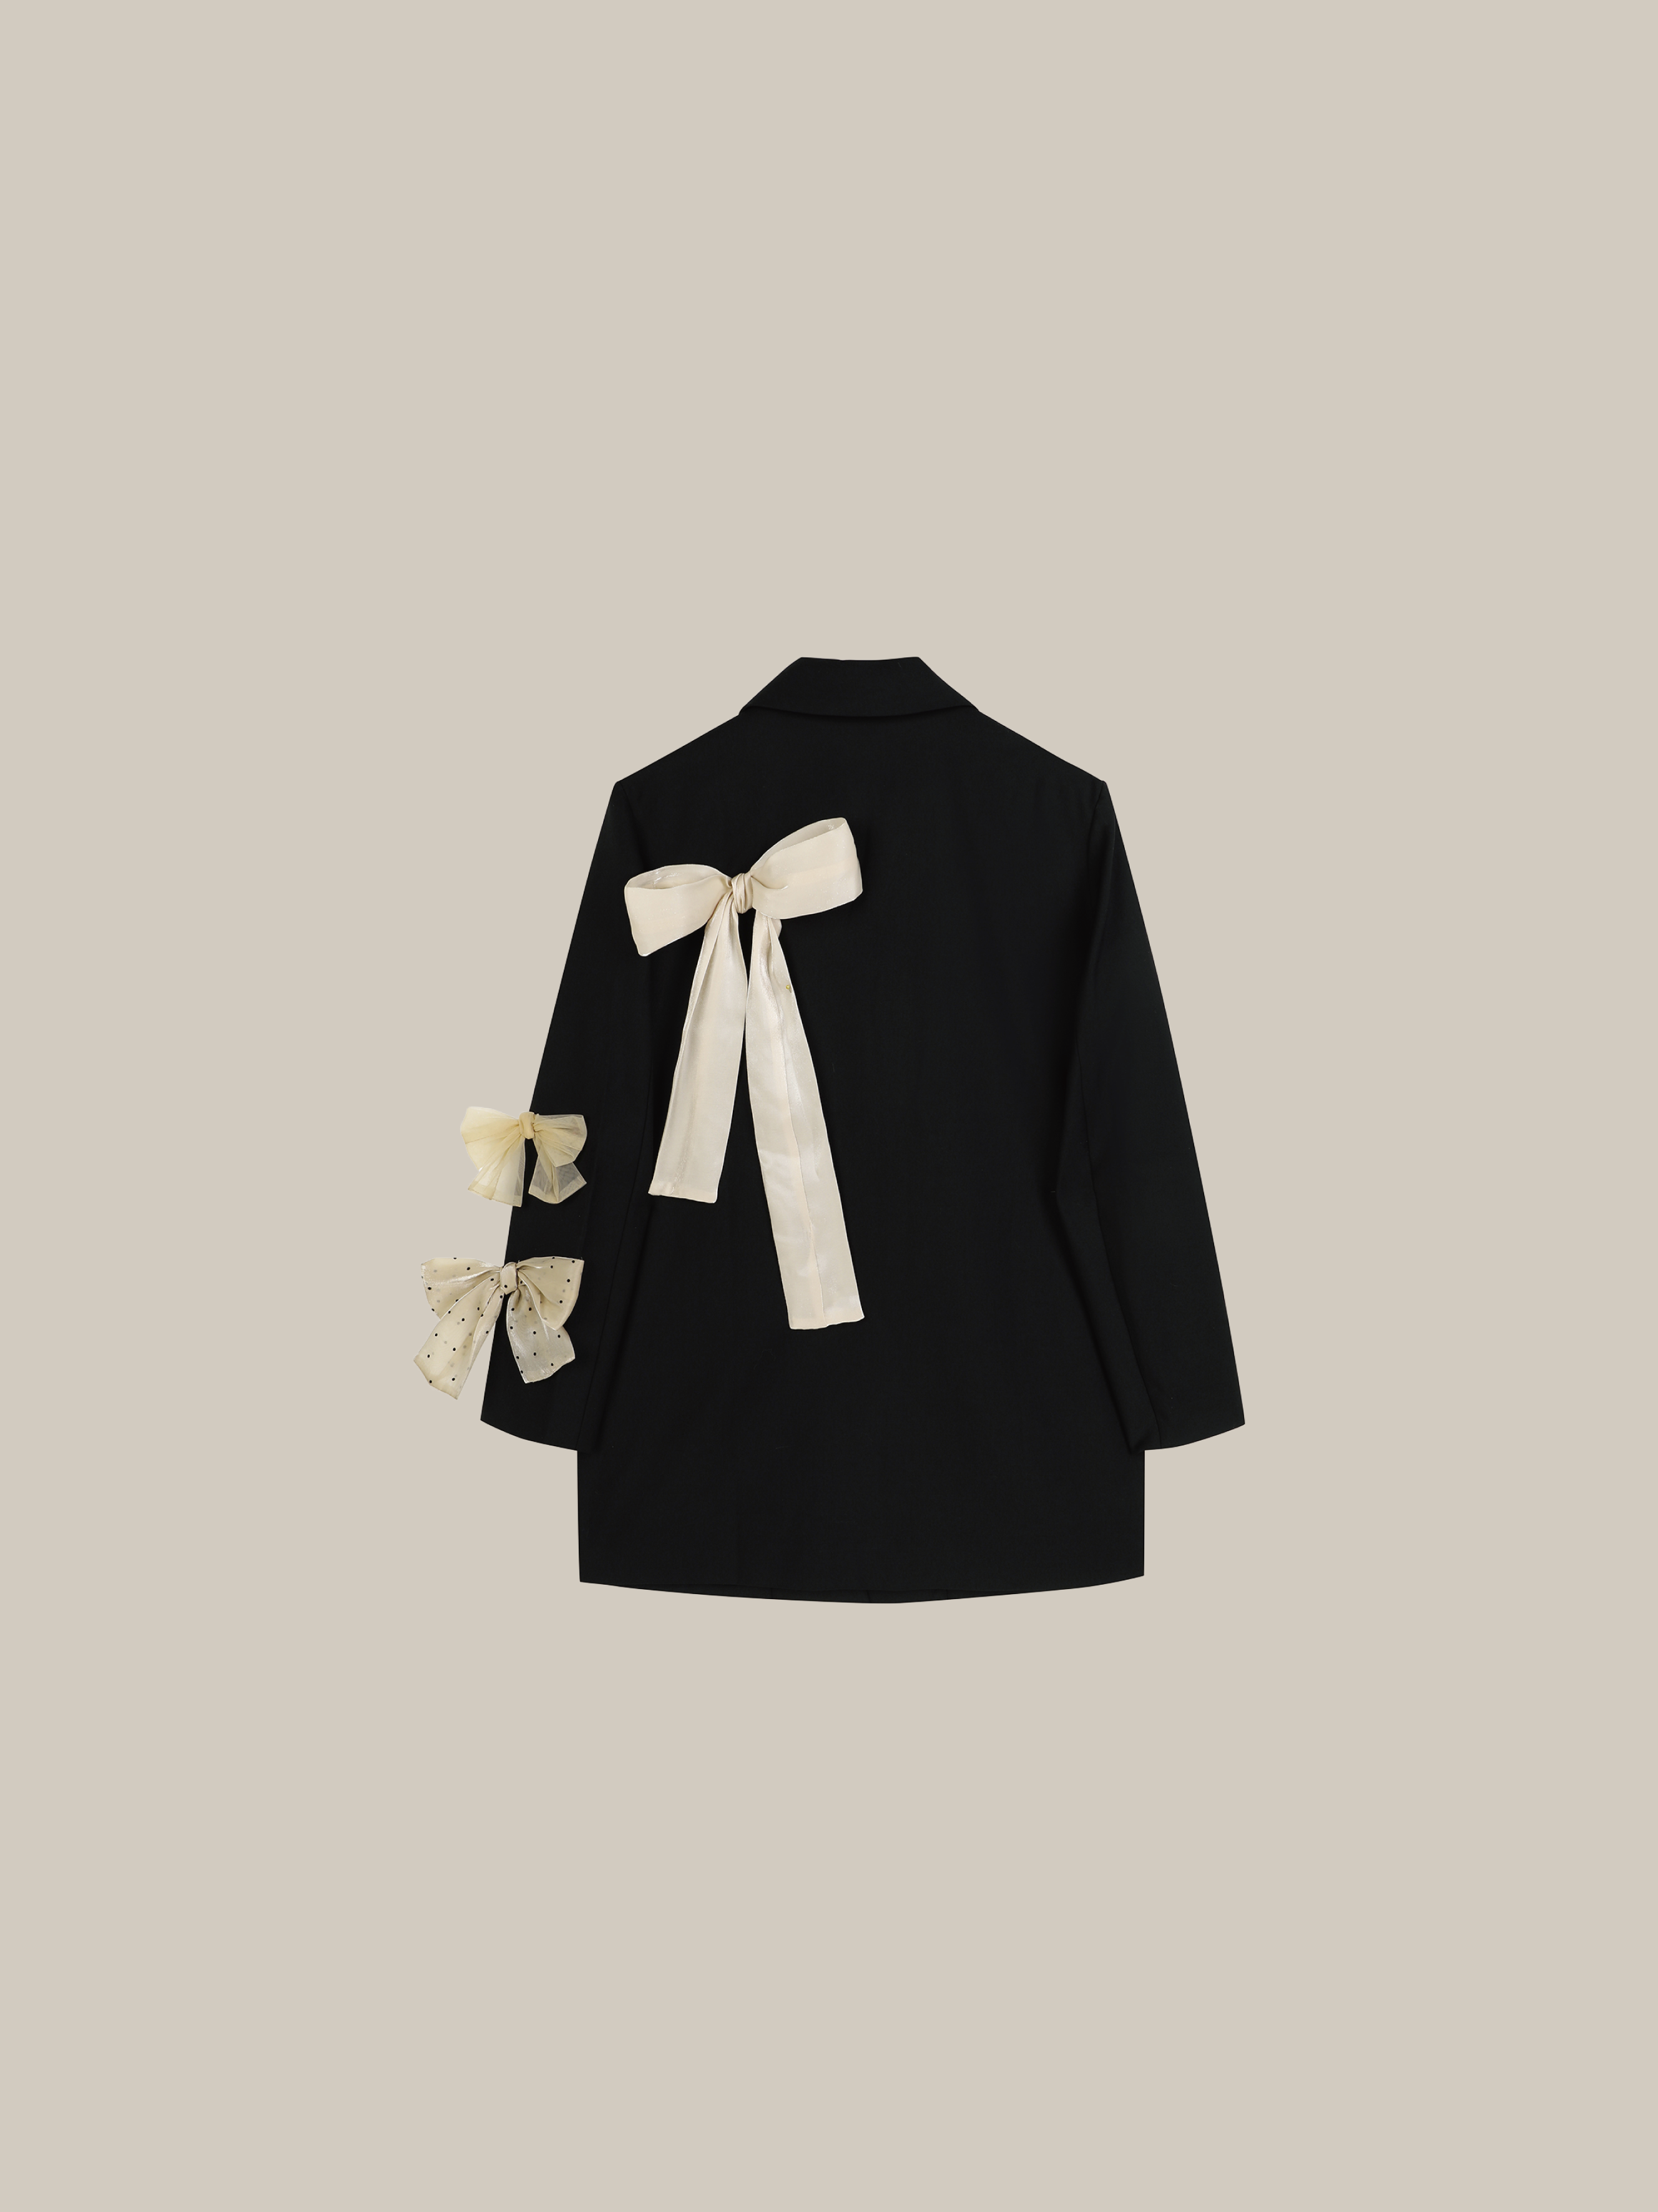 Ribbon Attacthed Black Jacket